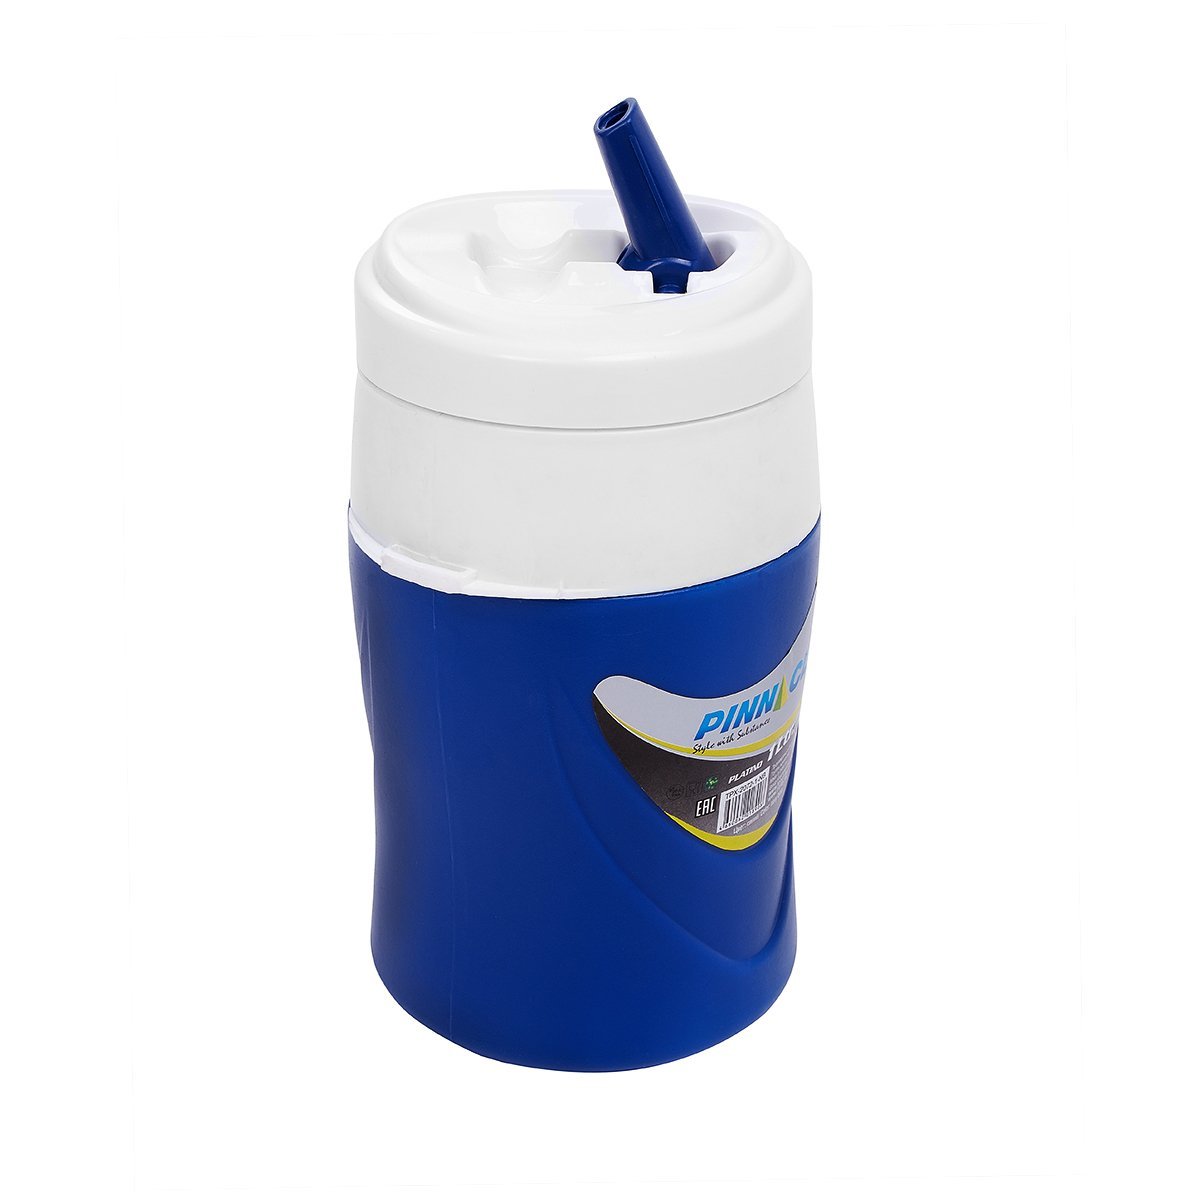 Platino Portable Beverage Cooler Jug for Outdoors and School, 1 qt is equipped with a straw lid and adjustable shoulder strap. Navy blue color